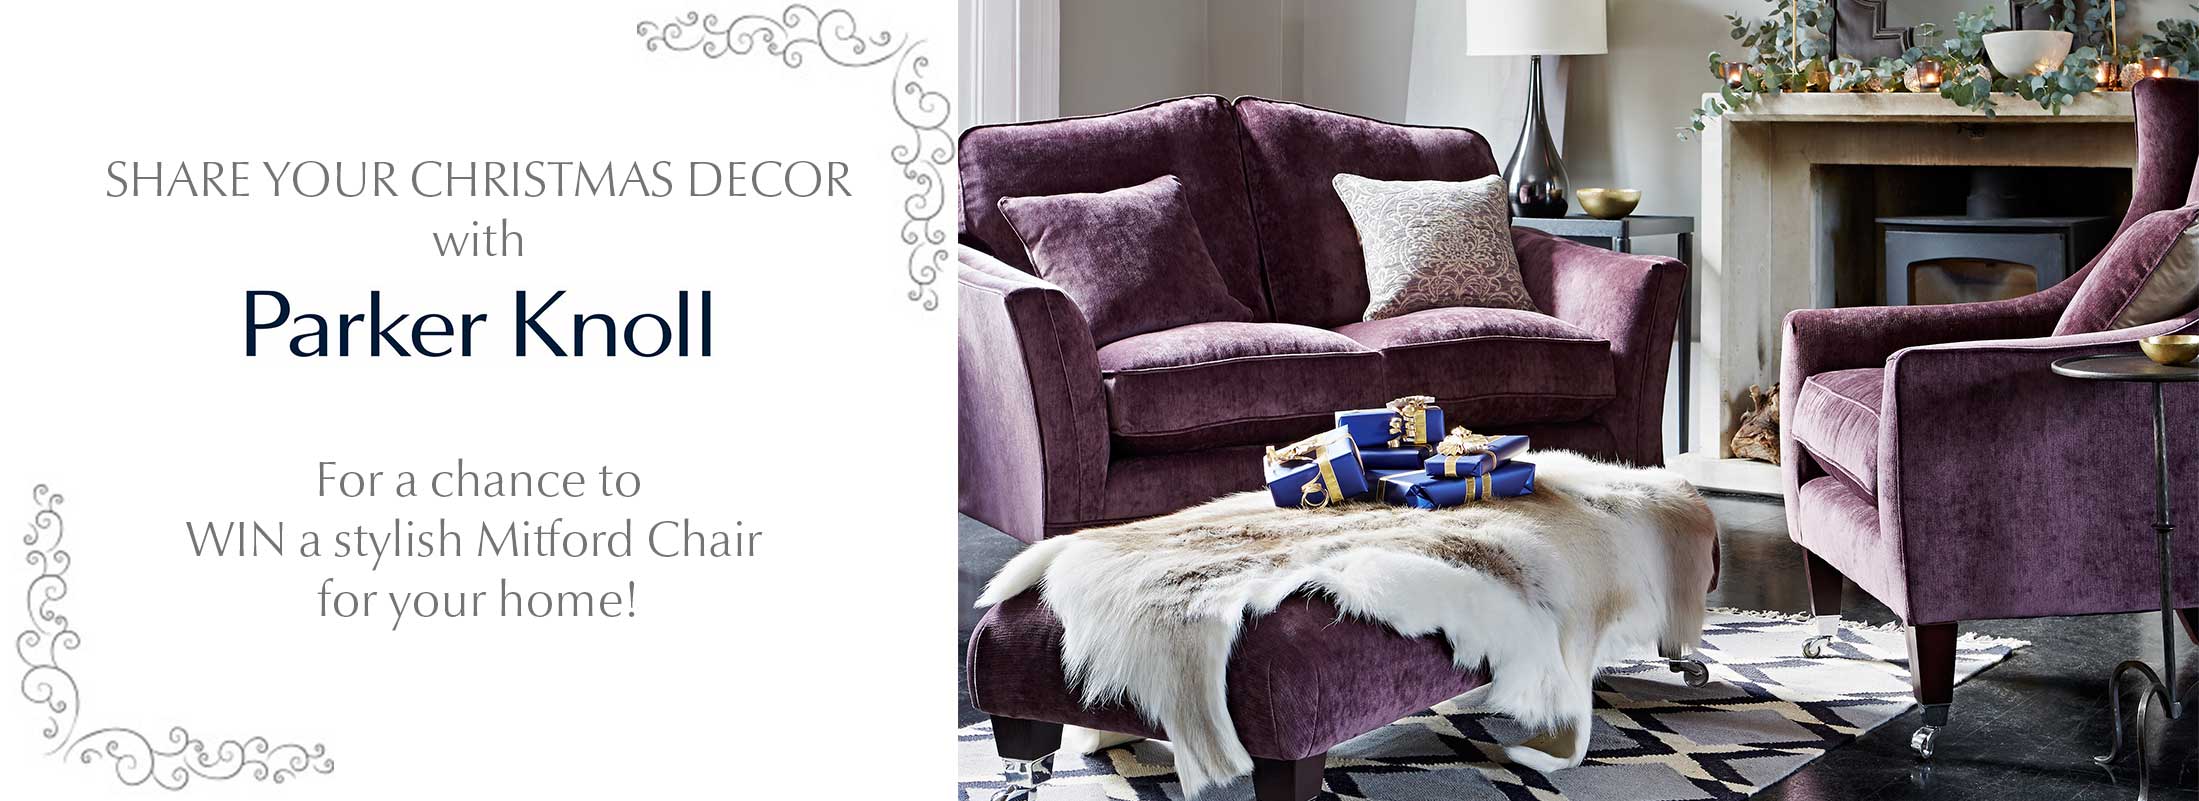 Our Christmas Instagram Competition: WIN a Mitford Chair